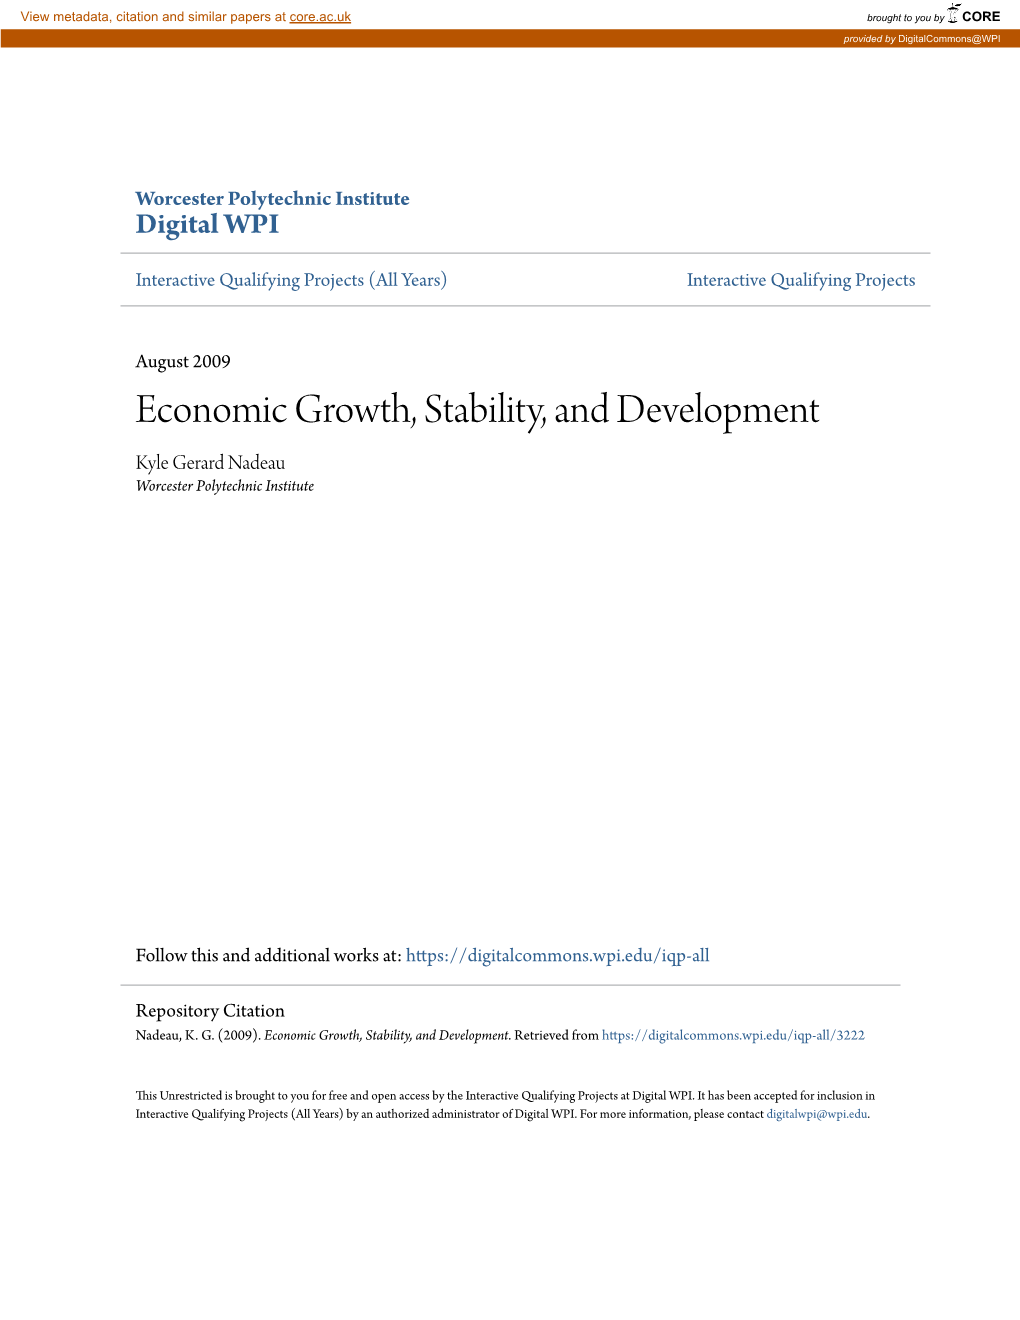 Economic Growth, Stability, and Development Kyle Gerard Nadeau Worcester Polytechnic Institute